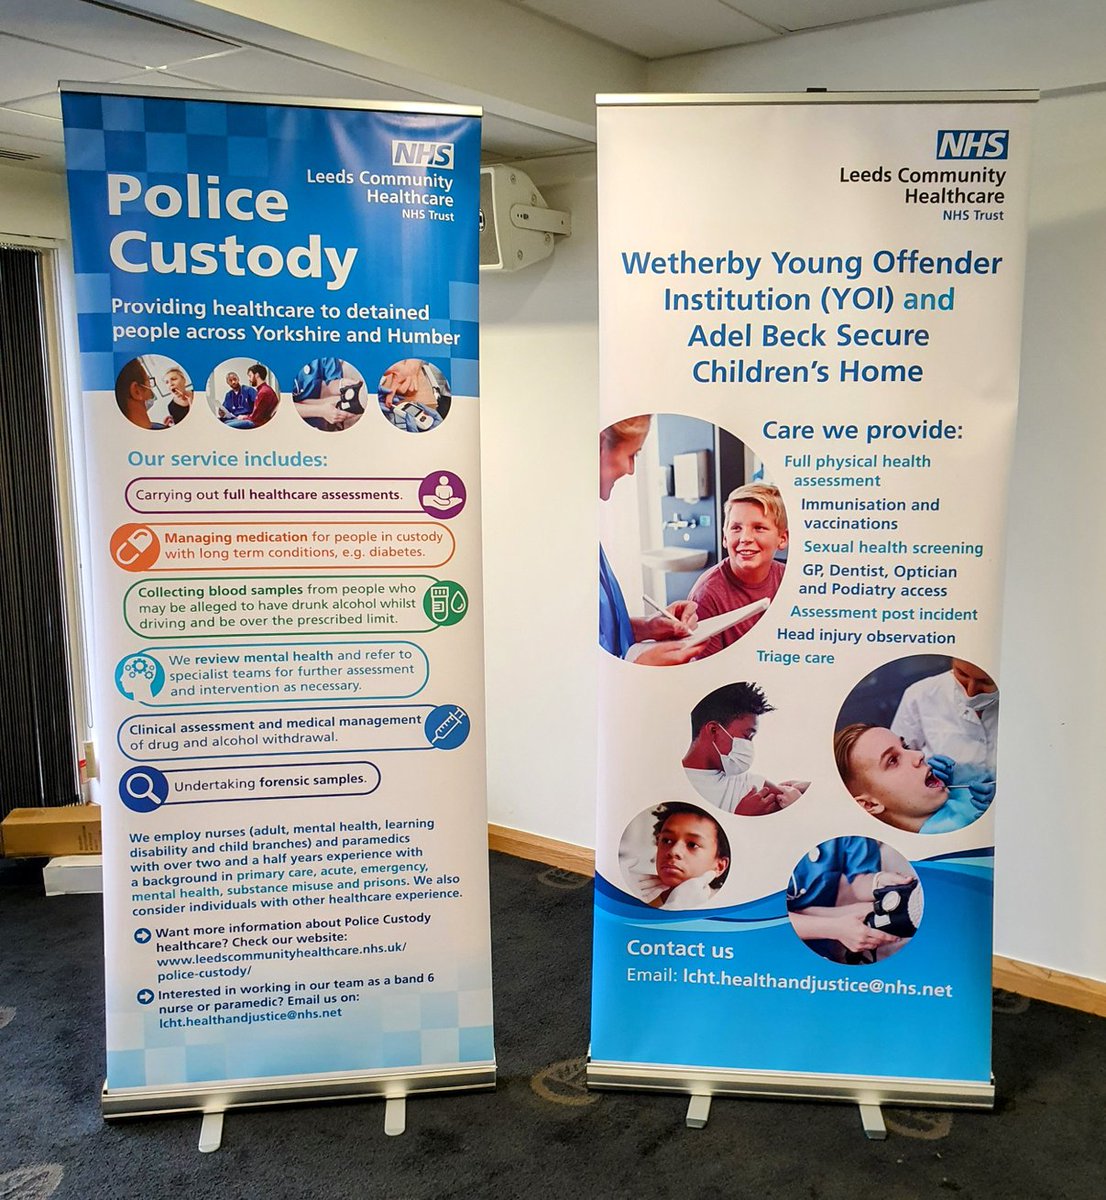 Thank you to everyone for making a fabulous recruitment event for police custody & Wetherby Young Offenders Institute. We really showcased how great it is to work as a nurse/paramedic for @LCHNHSTrust Its not too late to join us. e-mail us at: lcht.healthandjustice@nhs.net 🤩